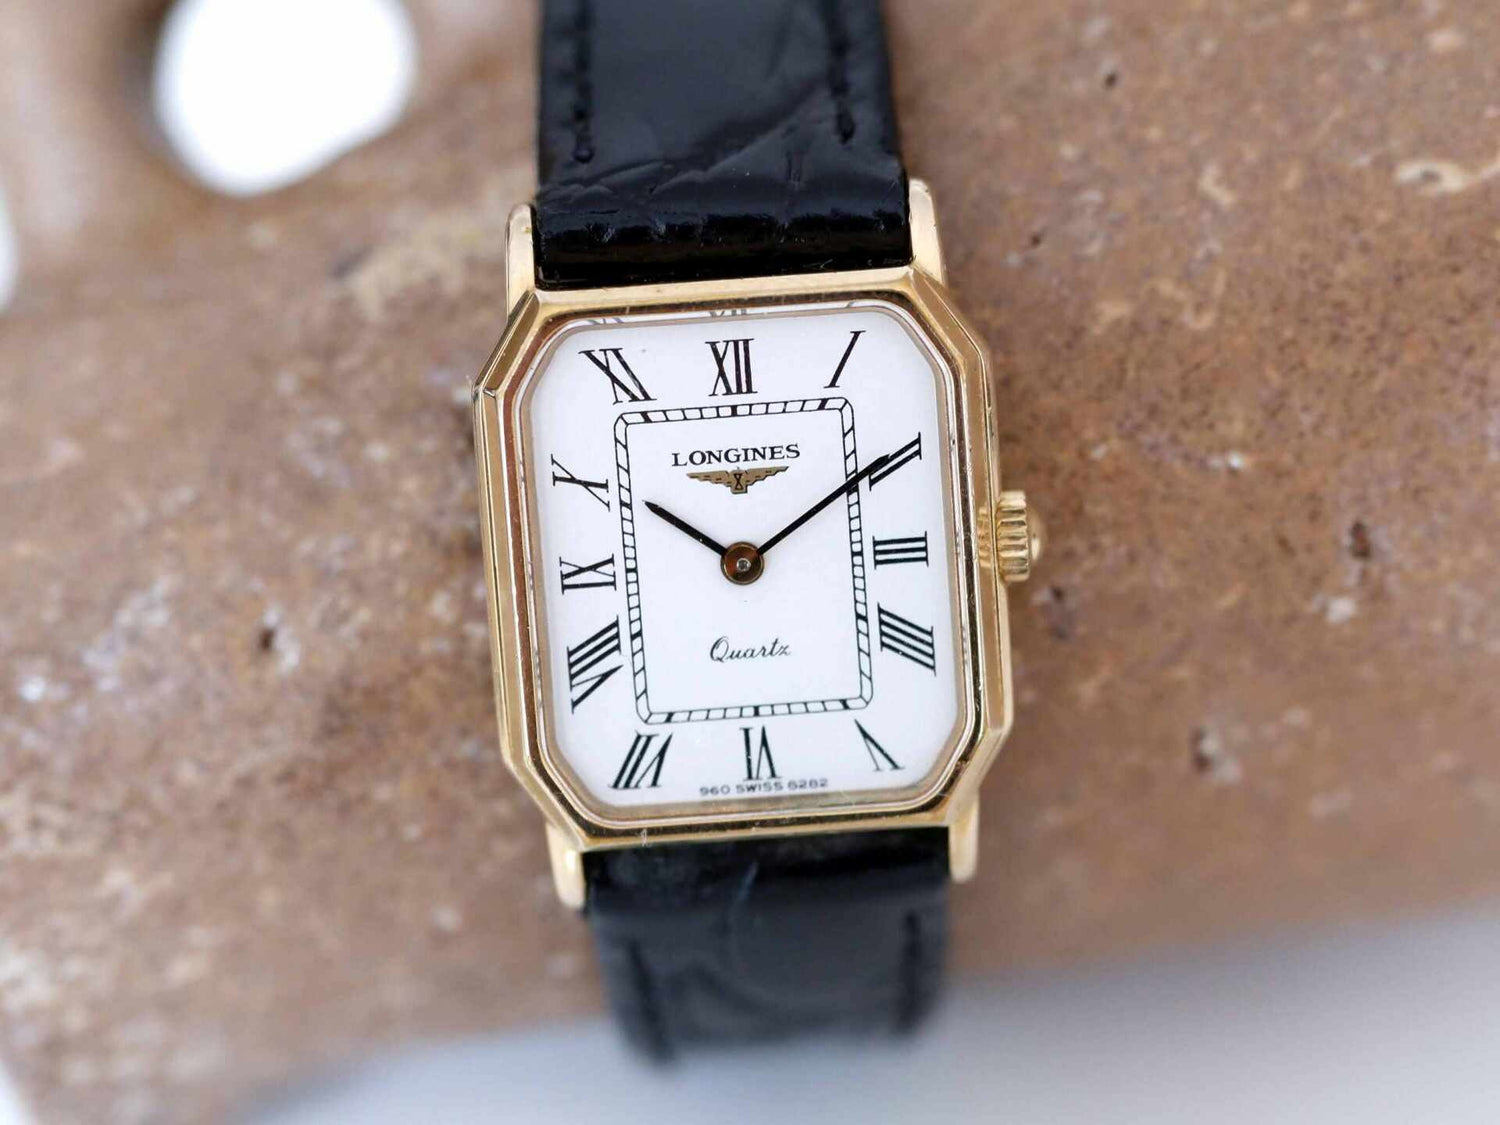 Longines Vintage Ladies Watch: 90s Golden, Rectangular with Roman Numerals | Front Side